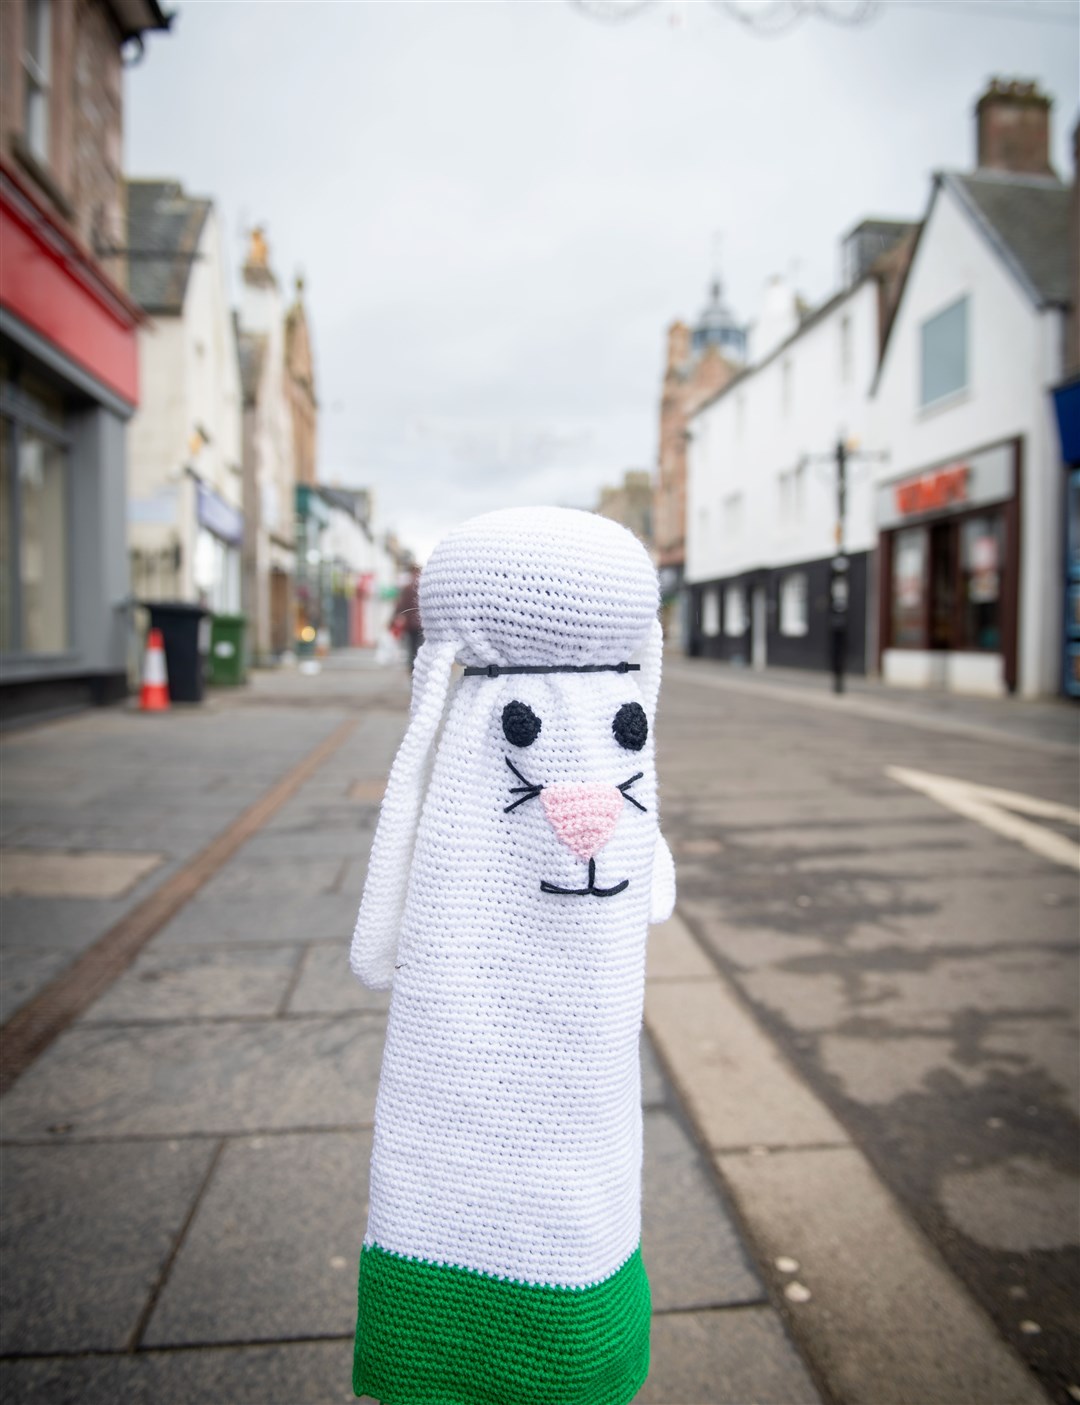 Easter-themed yarn-bombing on Dingwall High Street. Picture: Picture: Callum Mackay.